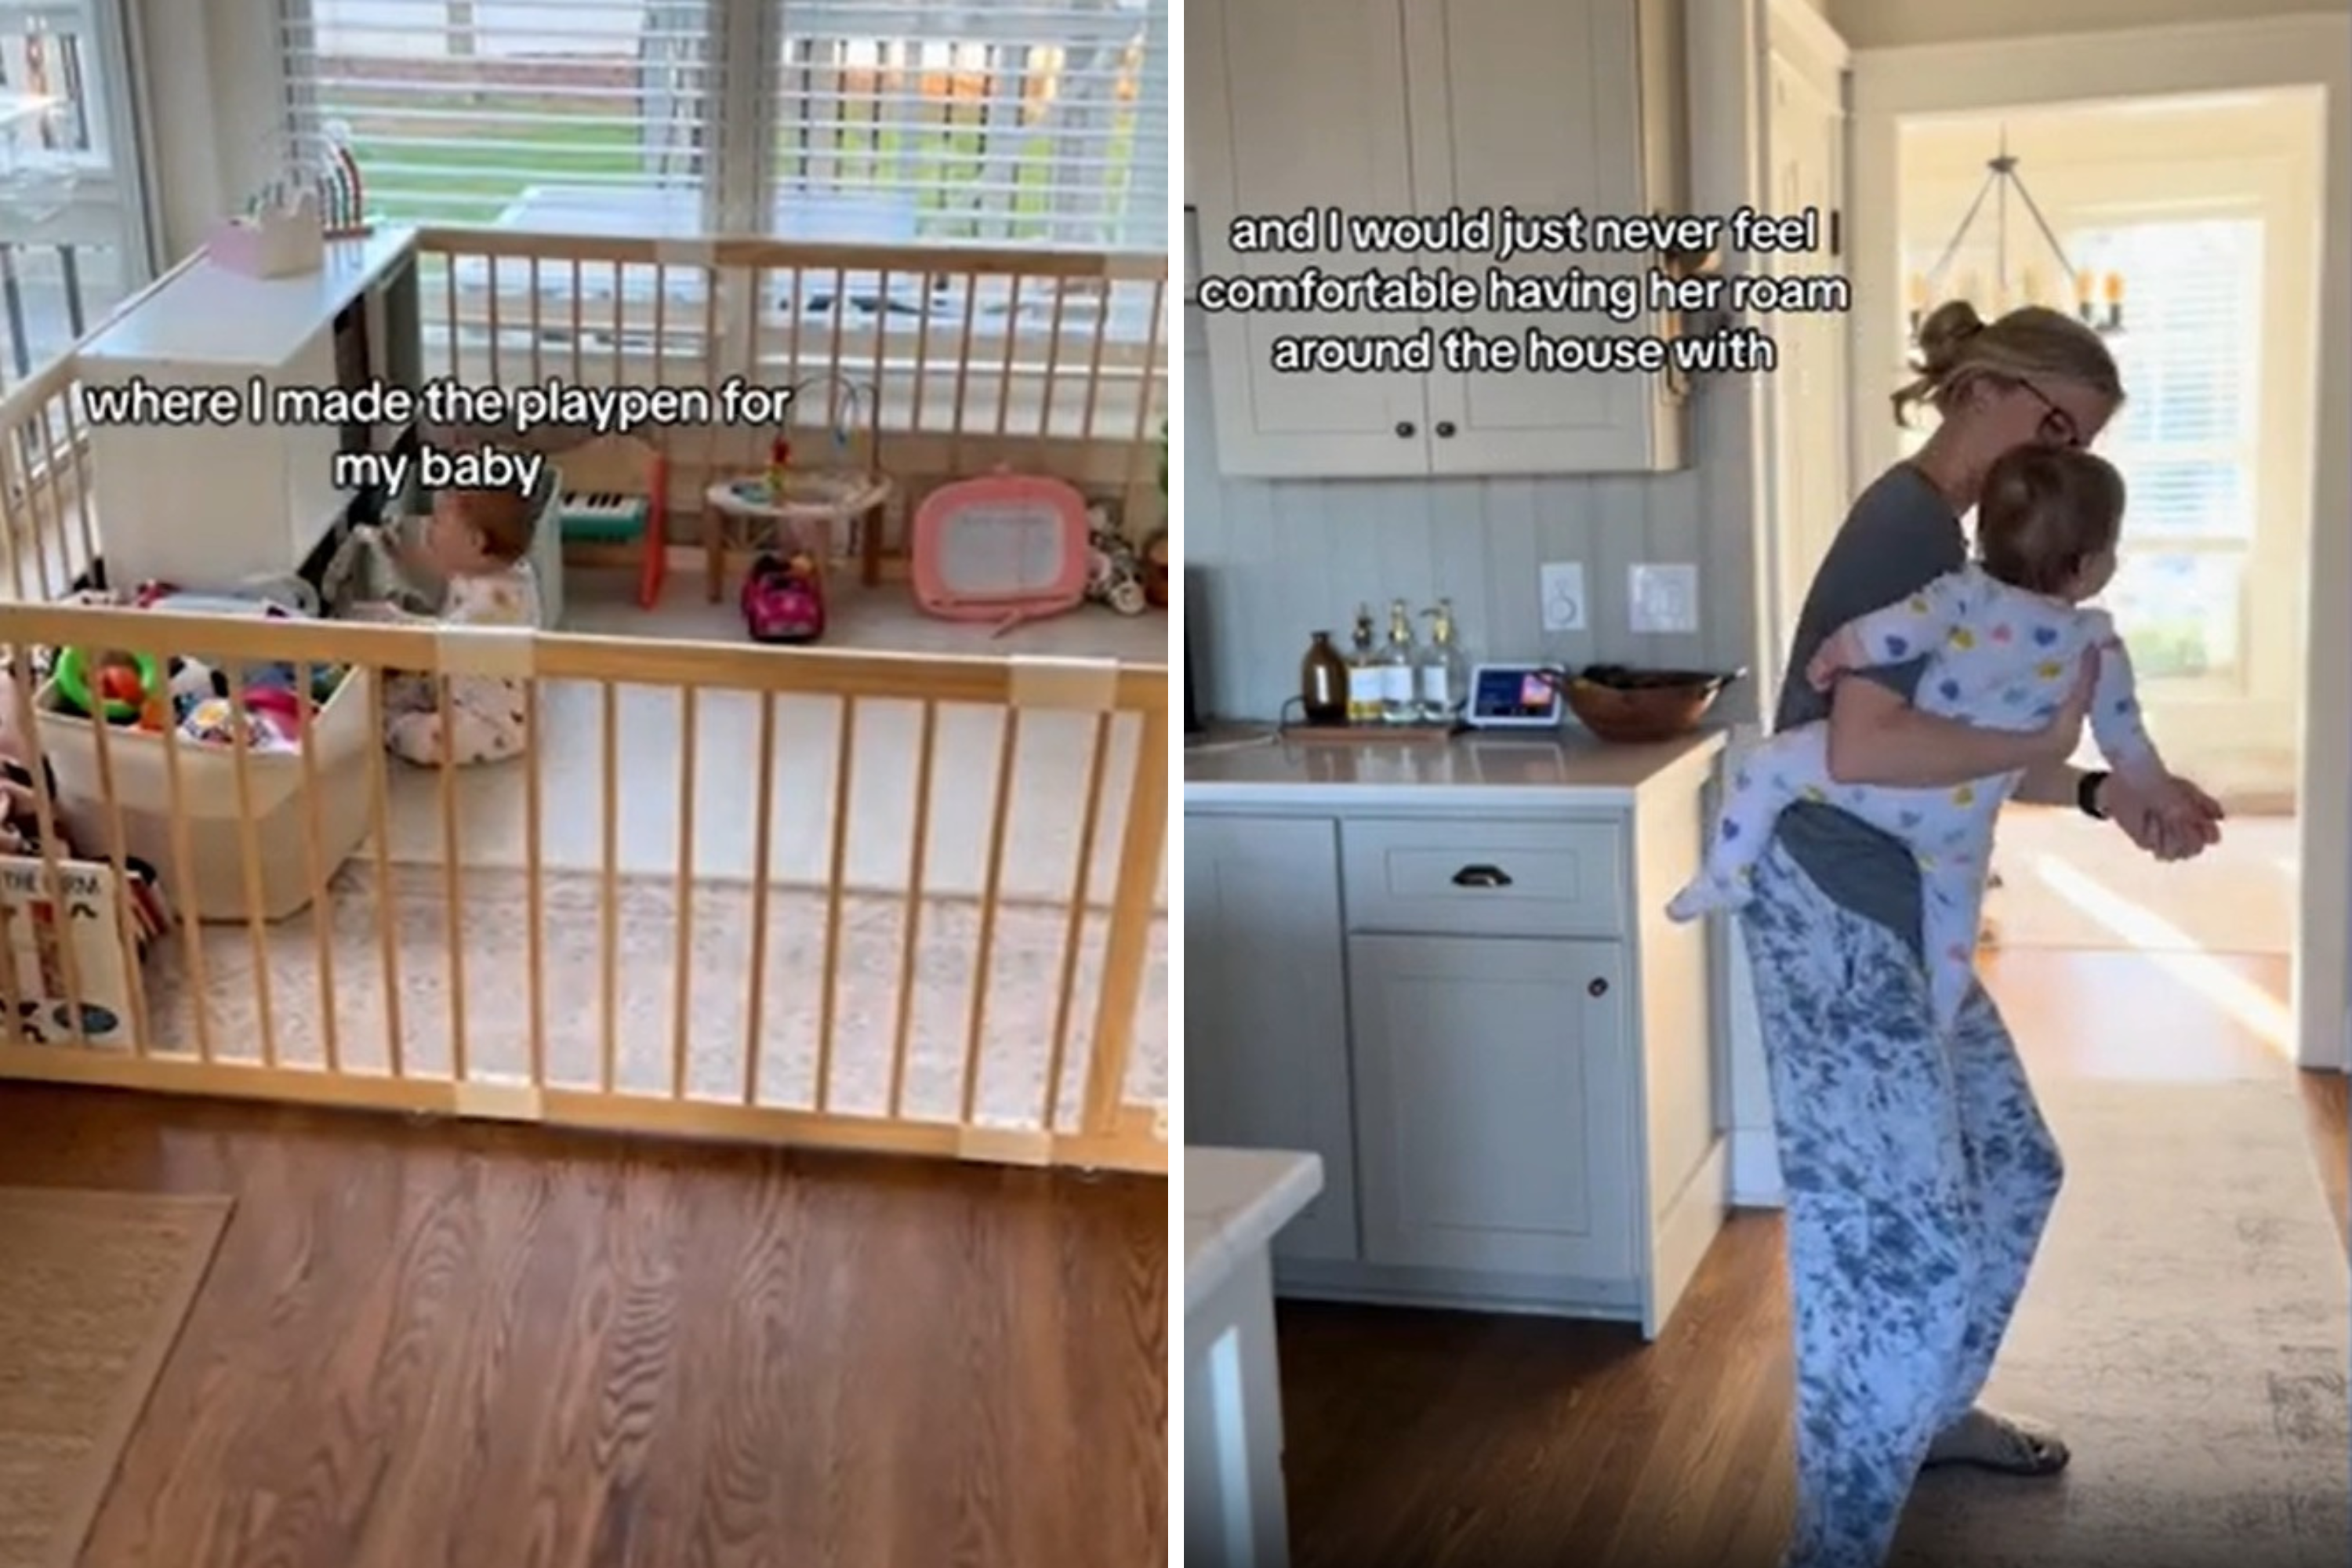 Mom accused of keeping toddler in "cage" defends playpen decision